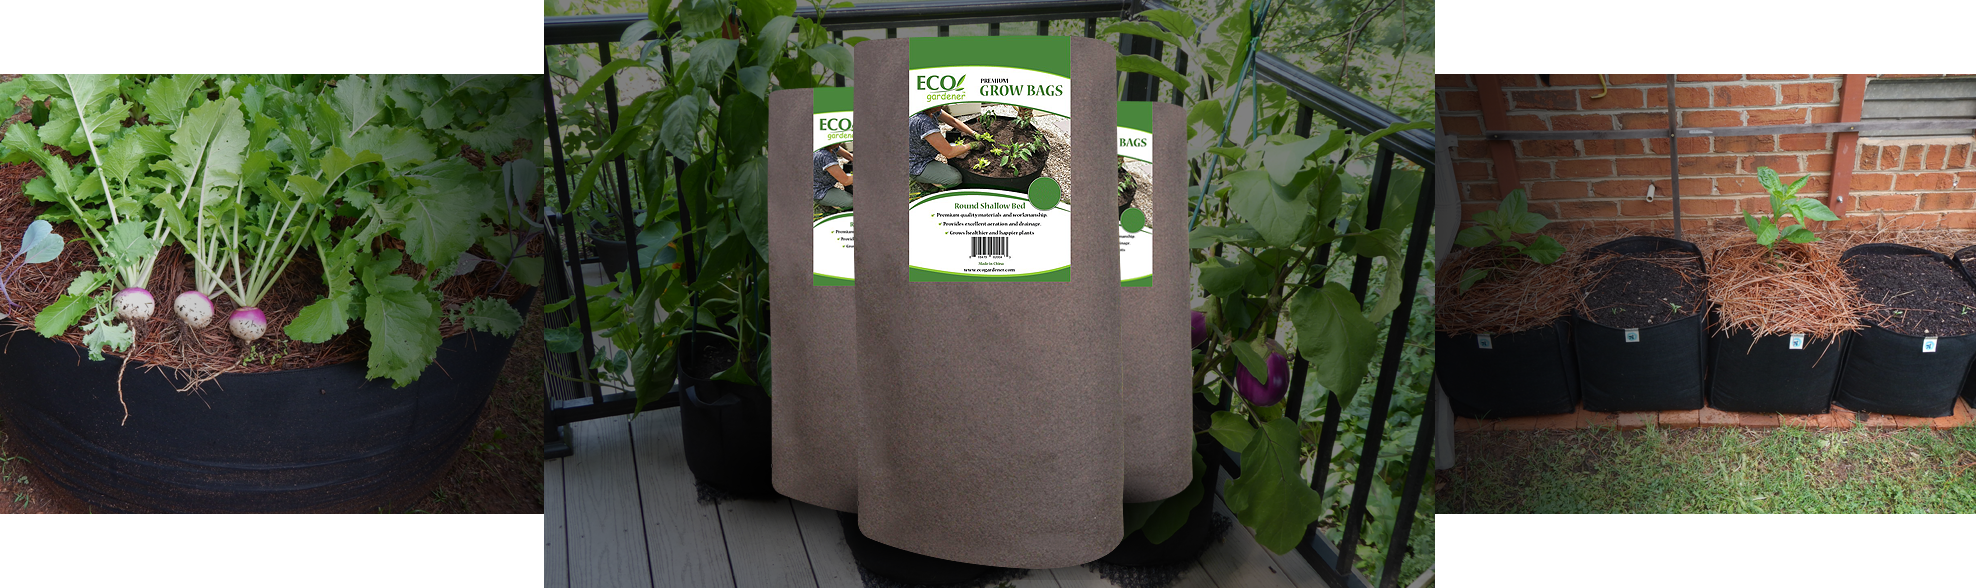 Grow Bag Gardening': No weeds, root circling or heavy lifting with